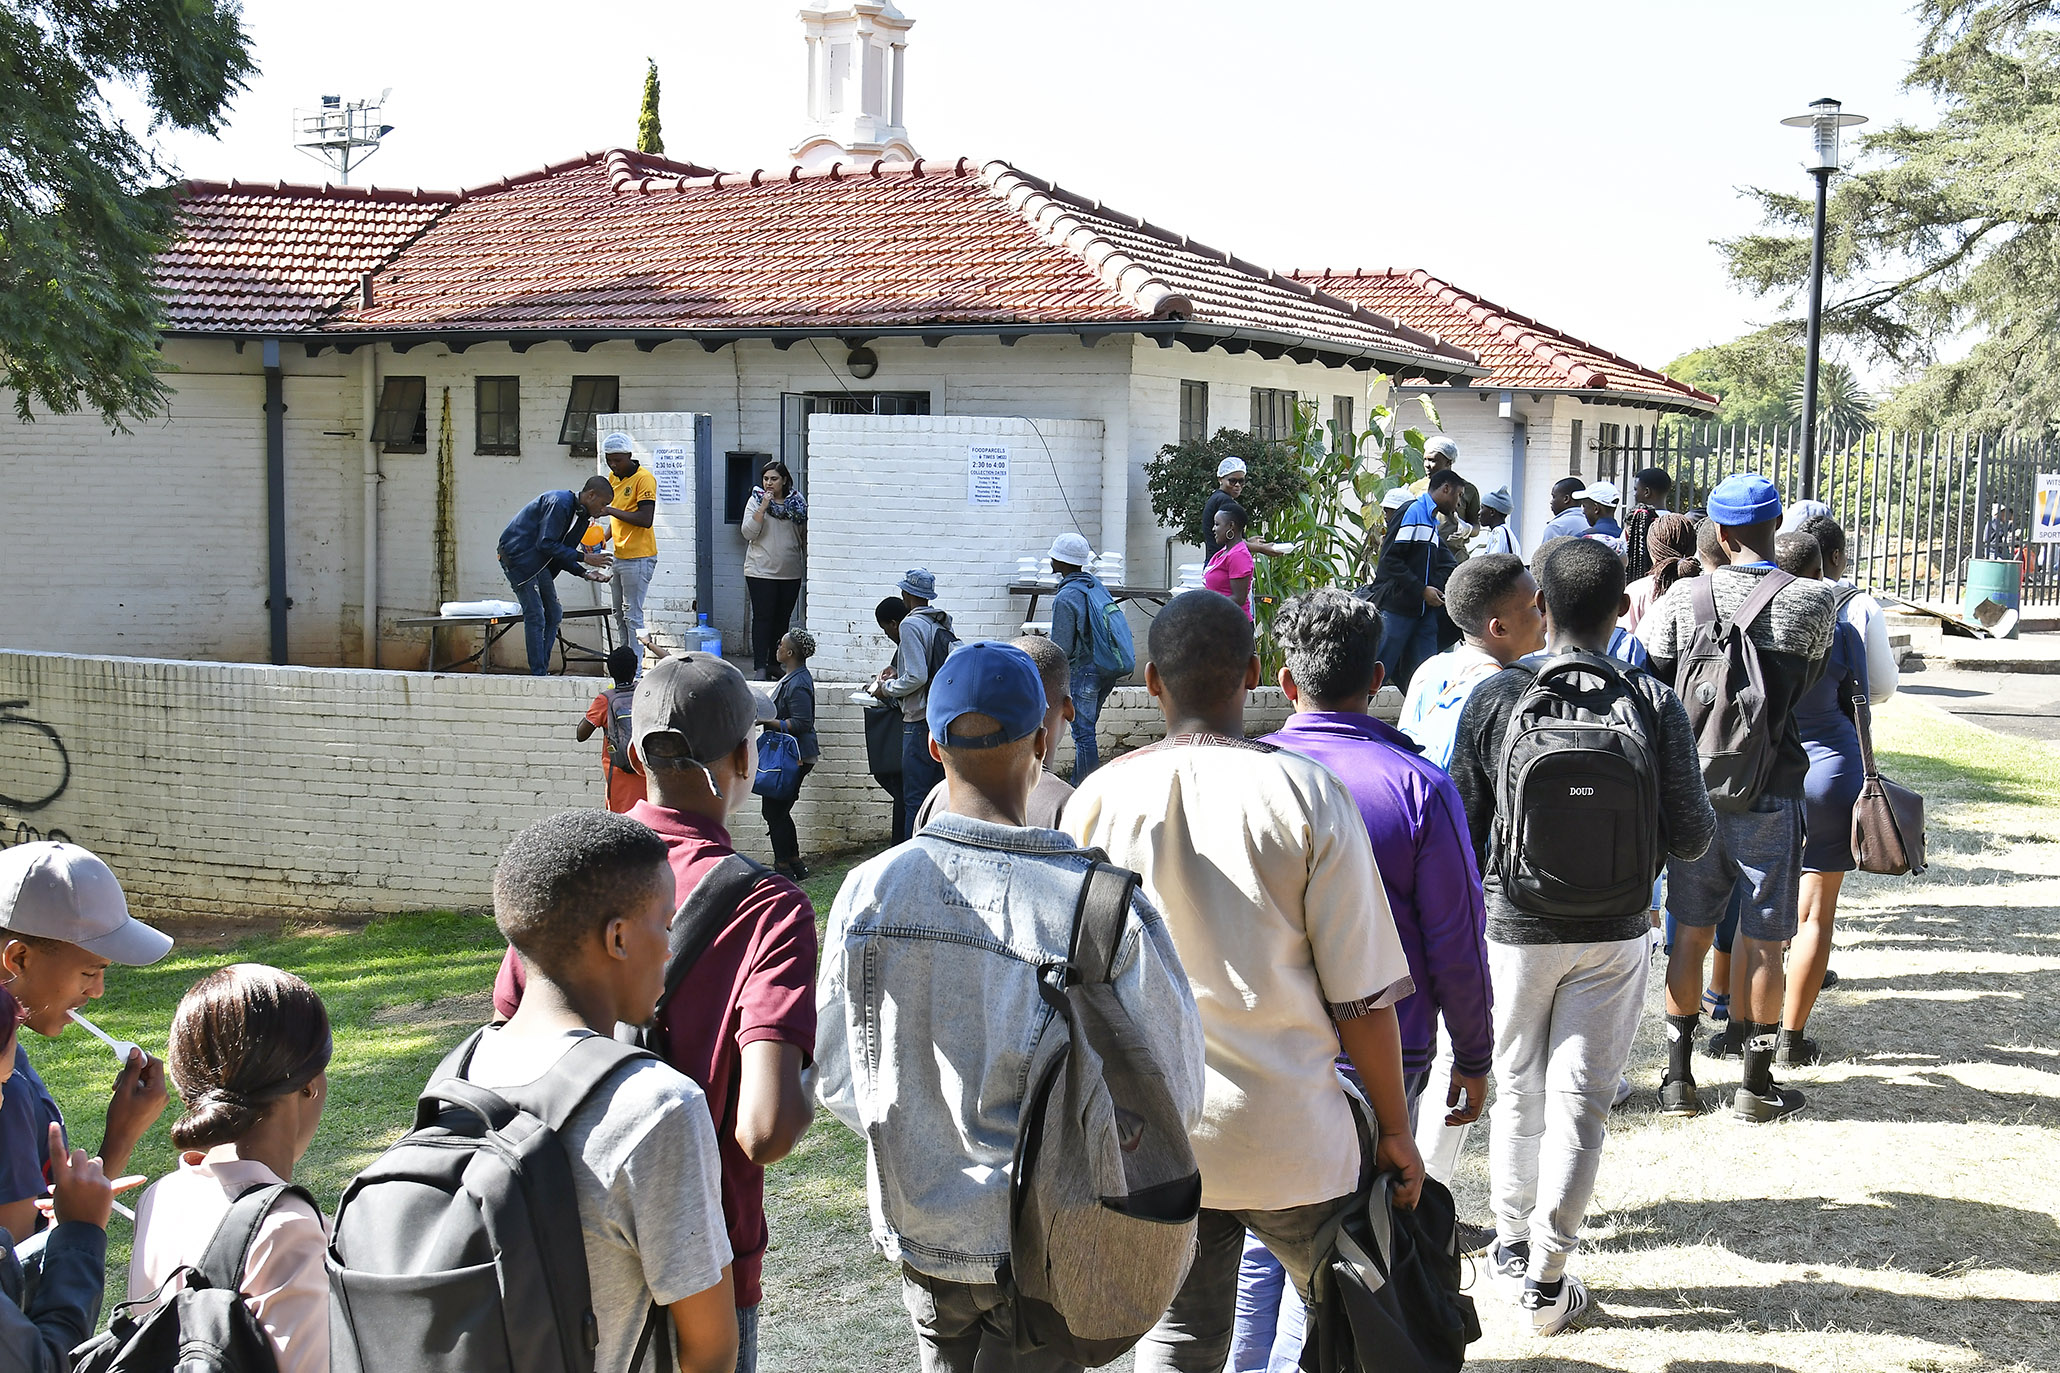 Masidleni daily meal programme at the Sanctuary on East Campus at Wits